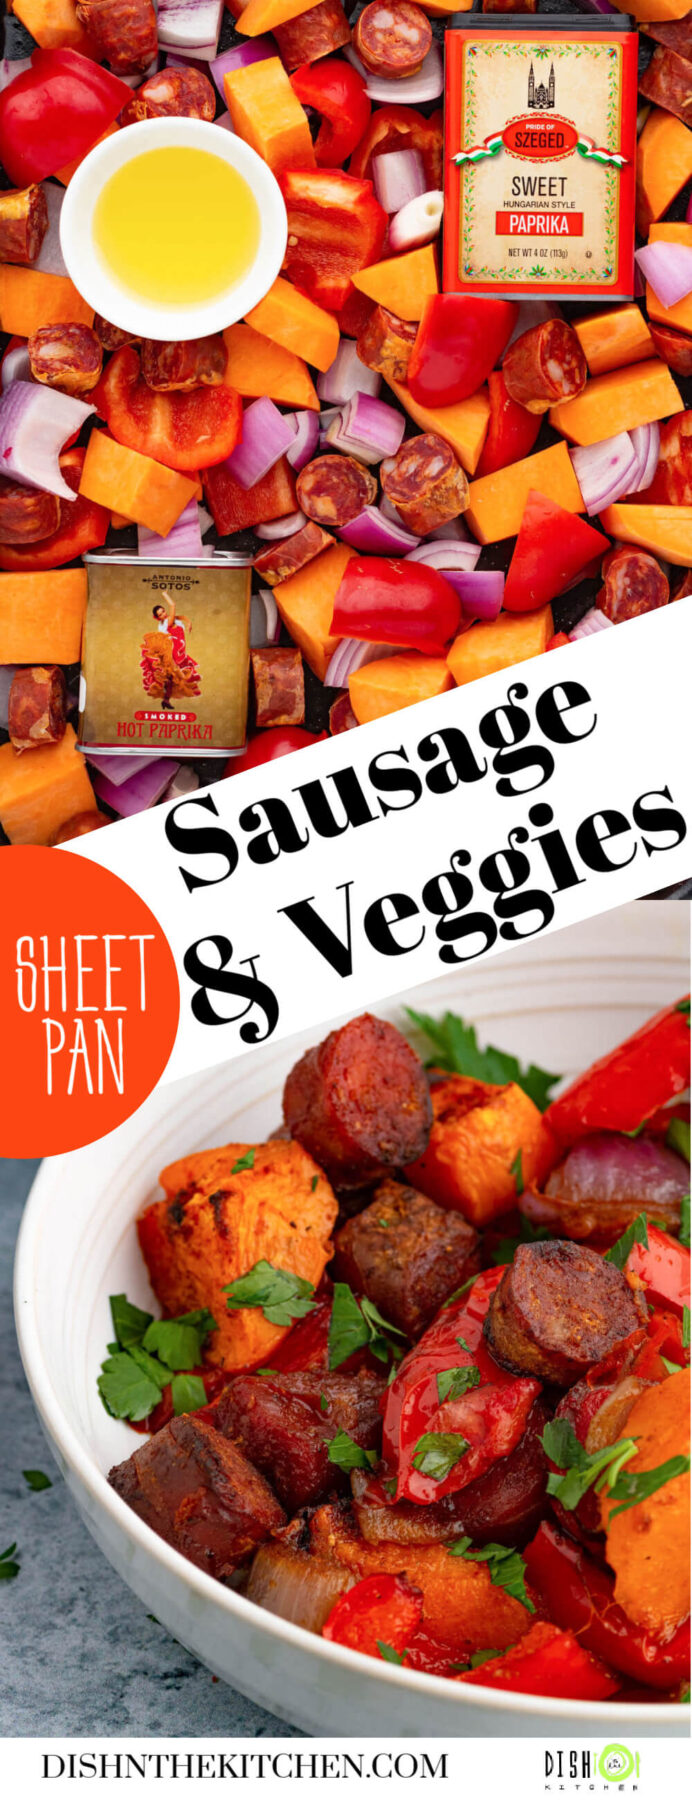 Pinterest image featuring sheet pan sausage and veggies raw and baked.